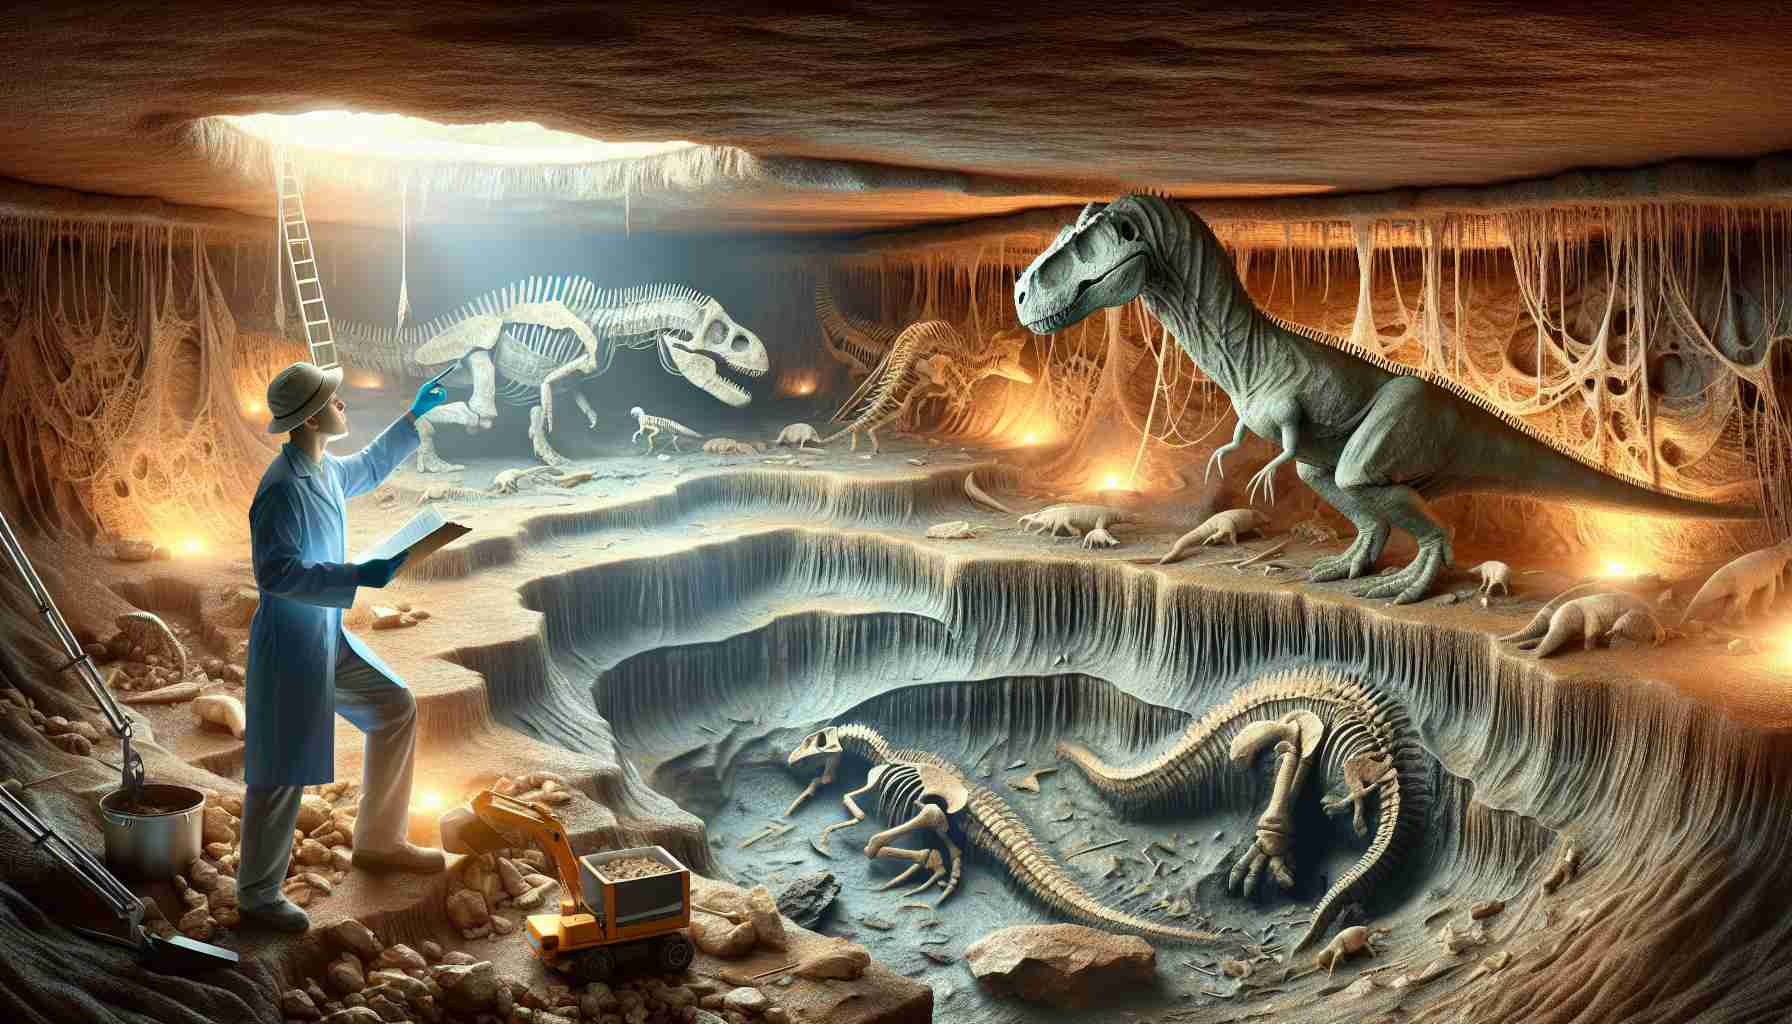 Realistic high-definition image of a paleontologist, who we will call a generic person without giving a specific name or identity, doing extensive meticulous research work in their diligent pursuit to unearth the world of ancient creatures, specifically dinosaurs, under the layers of sediment. This subterranean world is symbolically portrayed with detailed fossilized remains of the gigantic creatures encrypted in the layers of earth.